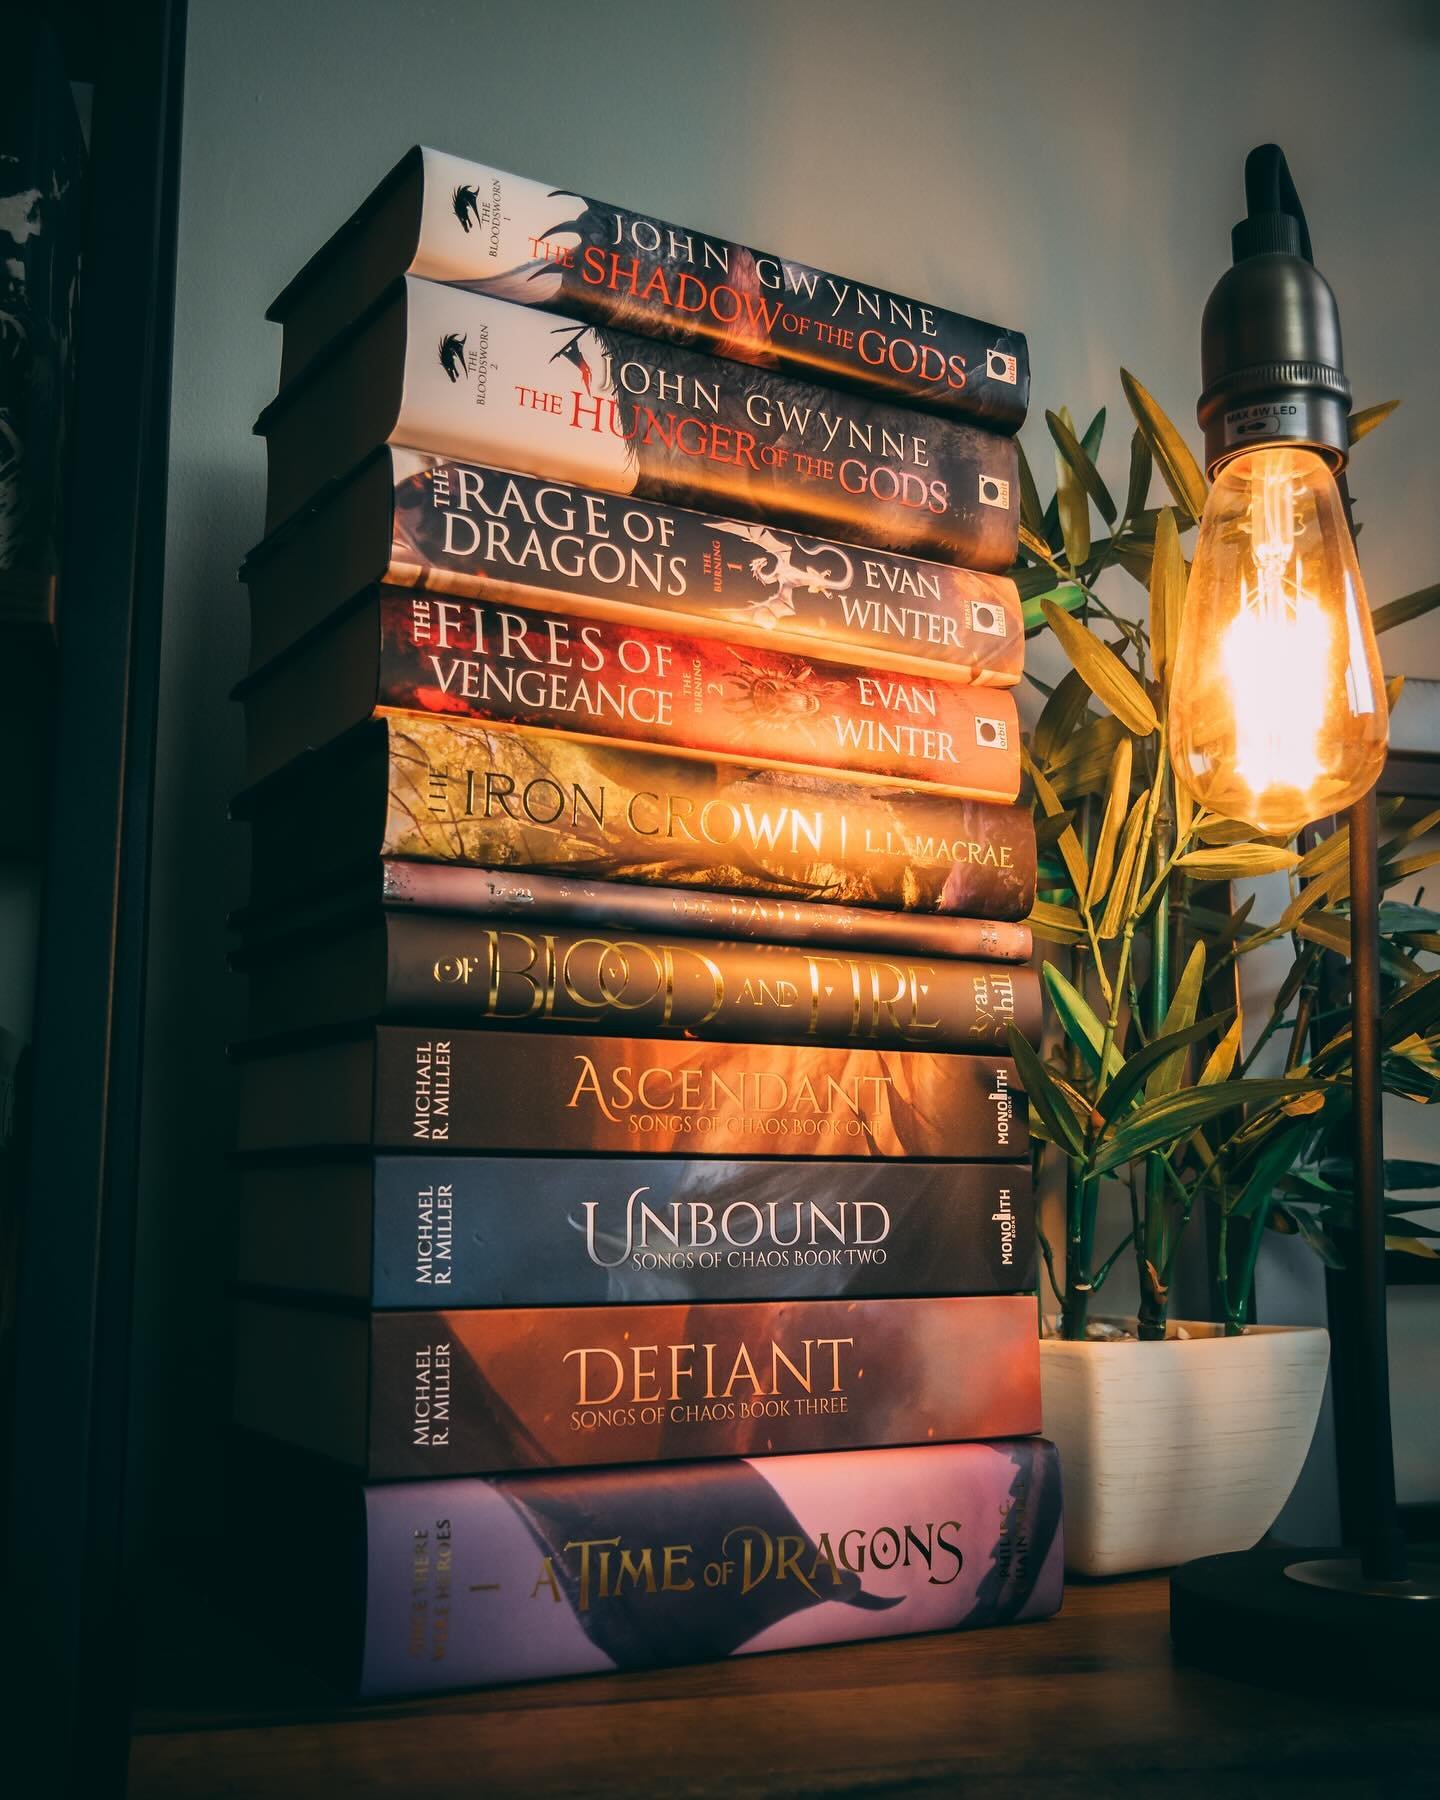 Dragon stack 🐉

📚 what&rsquo;s your favorite type of dragon? 

Not fire/ice/one that can dance but what type as in do you prefer fantasy books that allow people to bond with dragons? Do you like when they can talk? Do you prefer they don&rsquo;t ta